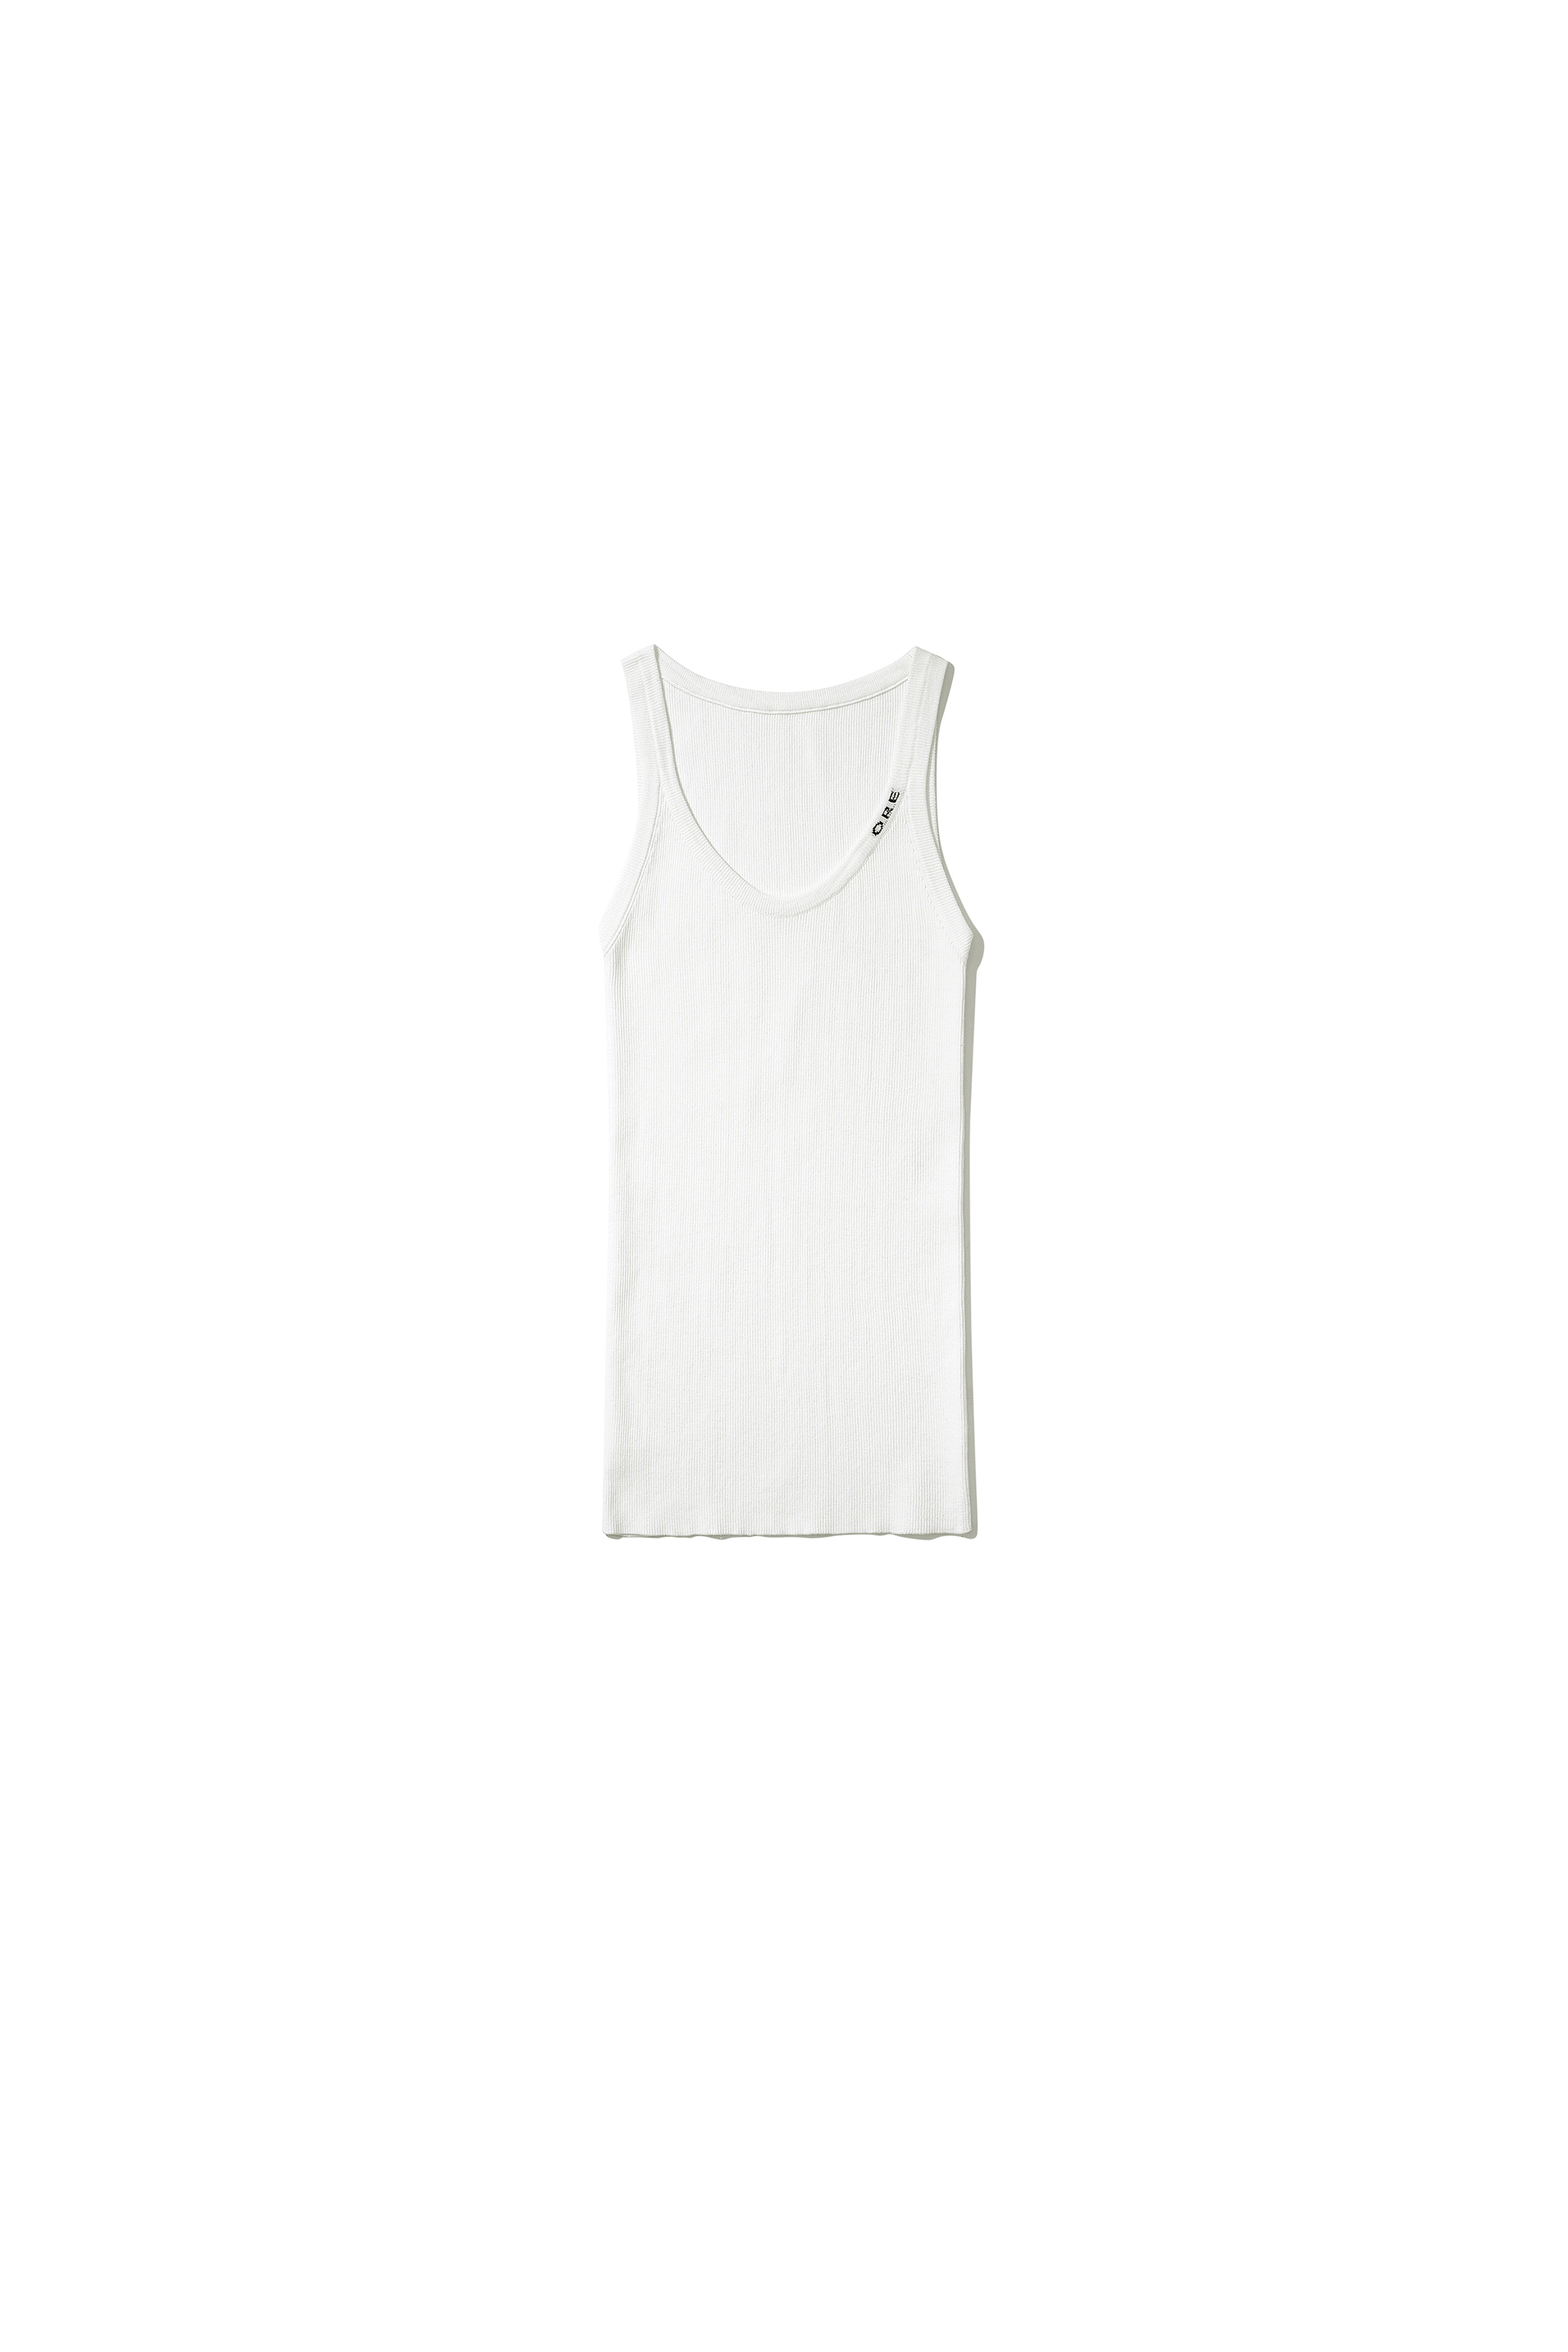 (Exclusive) ORE Knitted Sleeveless White